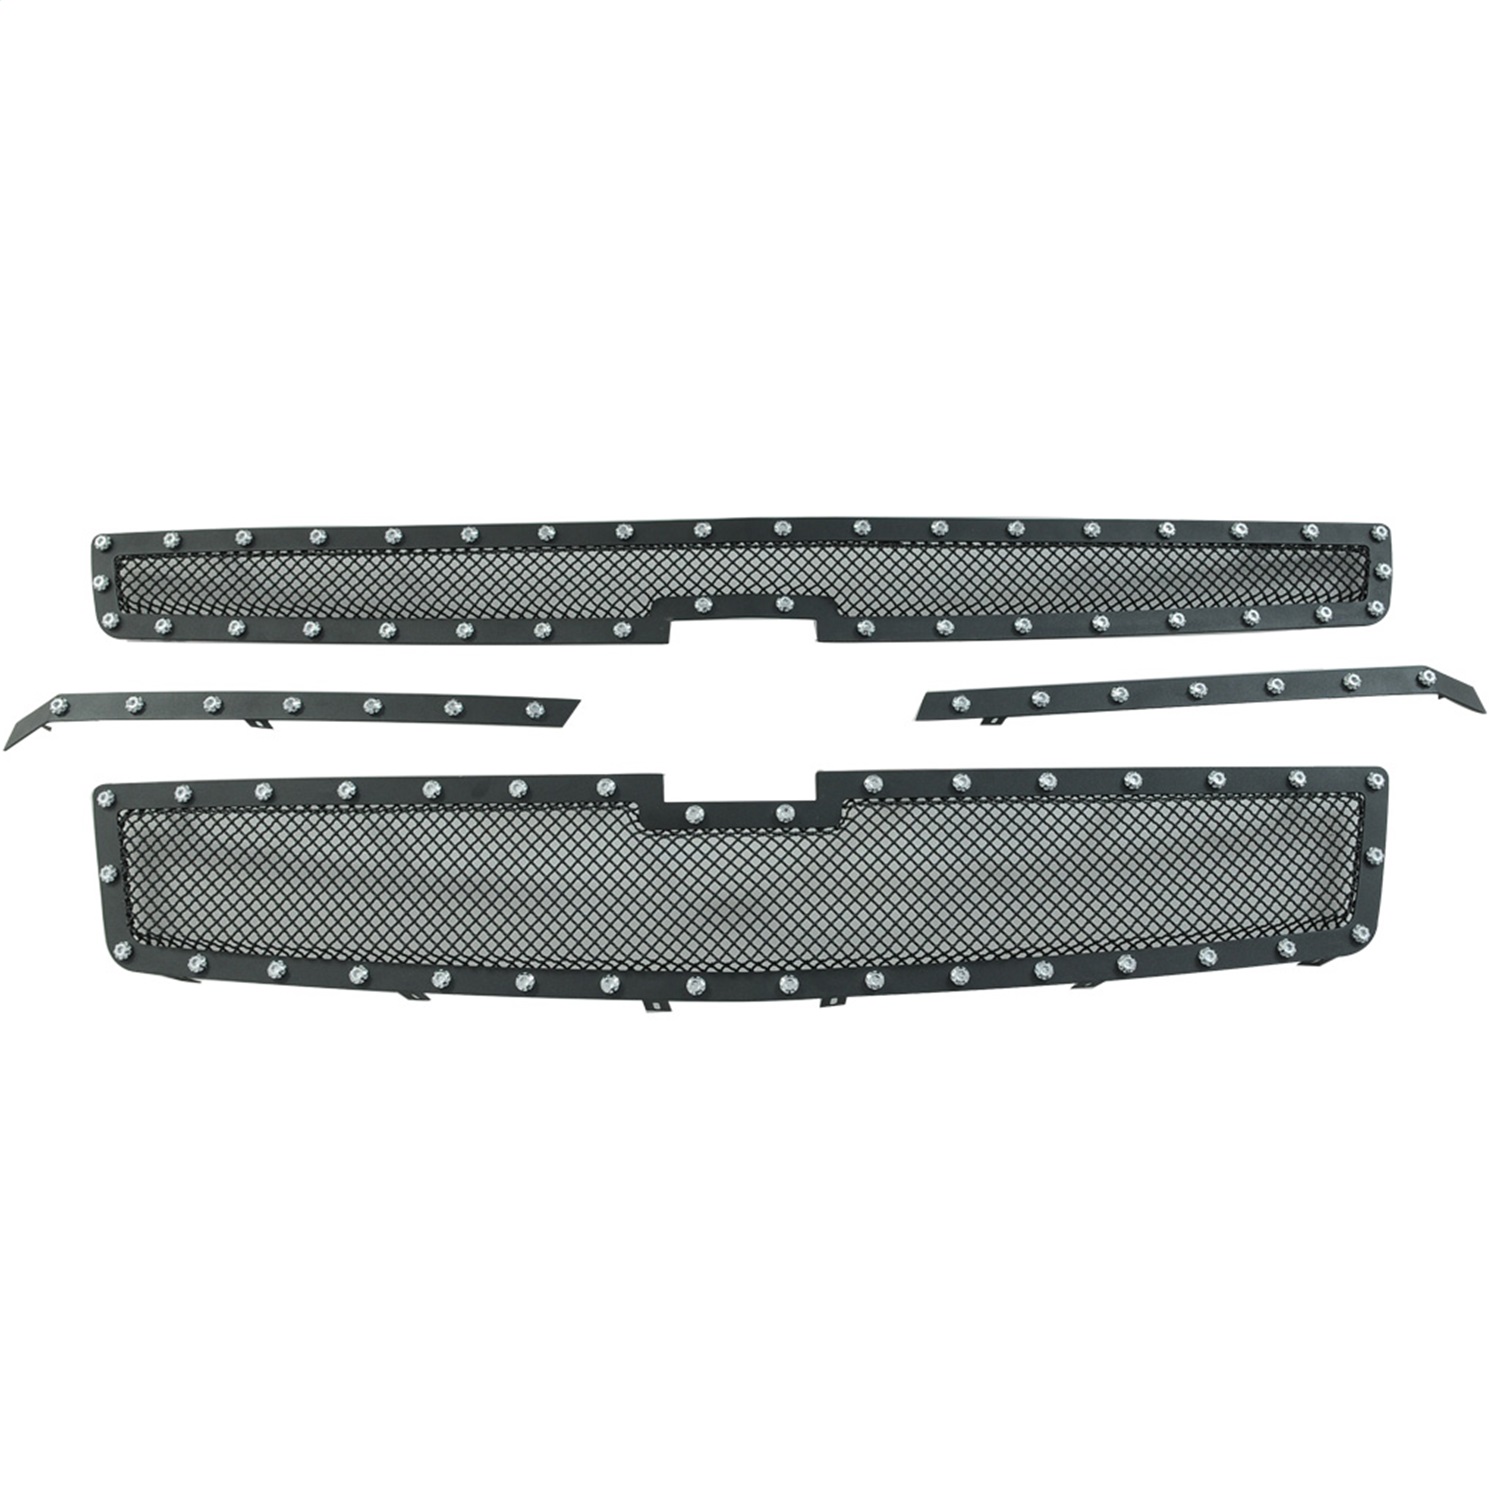 Paramount Automotive 46-0780 Evolution Packaged Grille